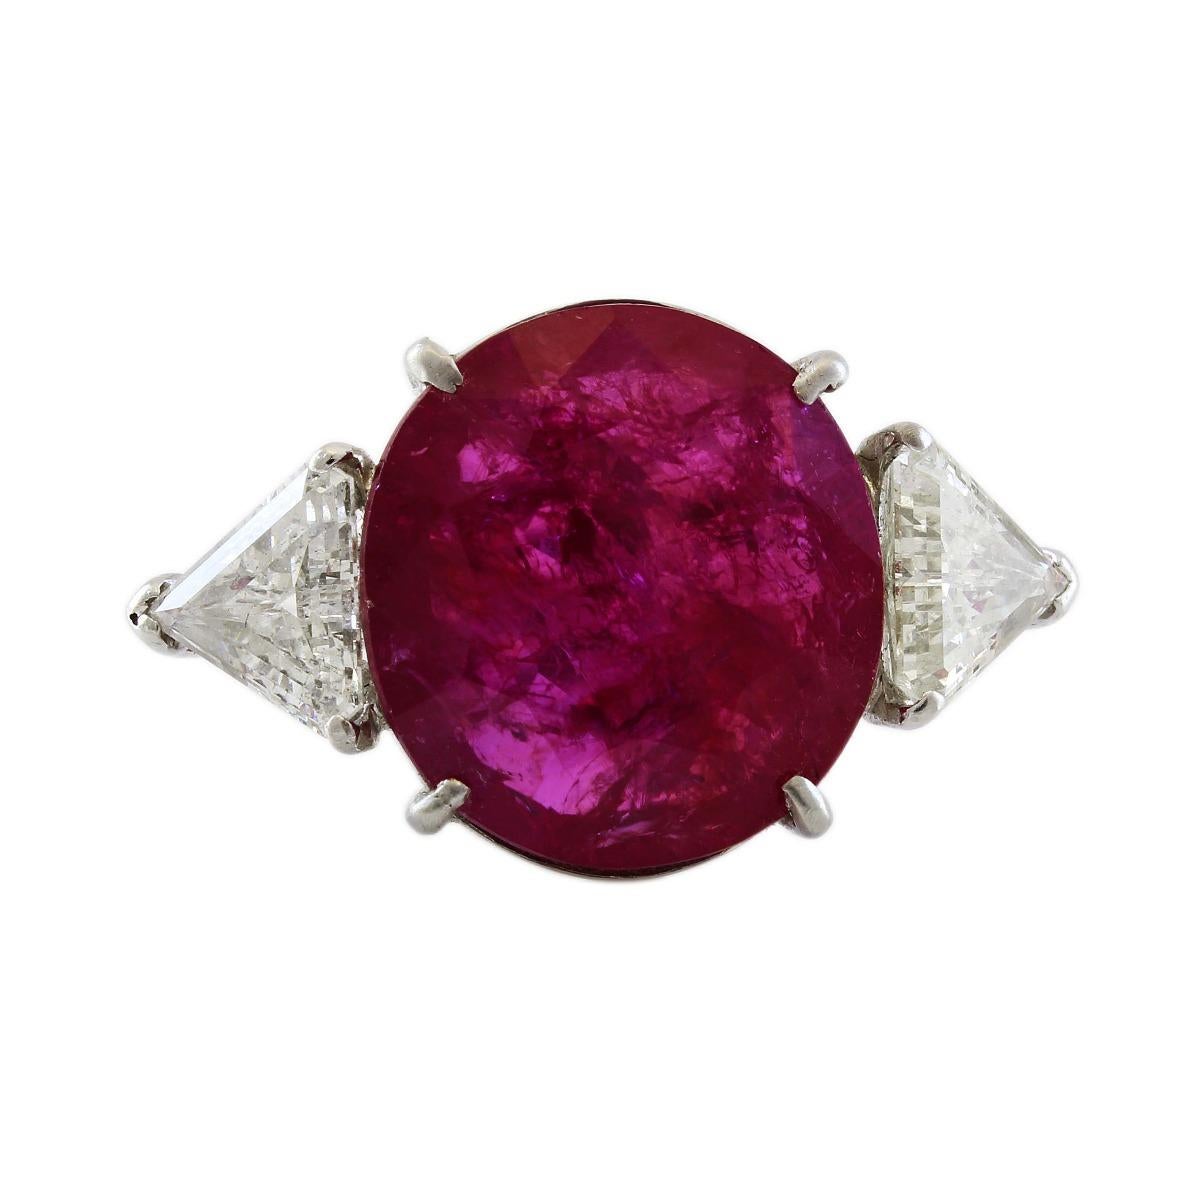 Platinum 11ct Natural Unheated Ruby and Diamond Cocktail Ring
Metal: Platinum
Gram Weight:  8.2 Grams
Diamond Carat Weight: 2 CTW 
Diamond Color: J-K
Diamond Clarity:  SI1-SI2
Diamond  Cut: Trillion Cut
Finger Size: 8.25 (US-Scale)
Gemstone: Natural